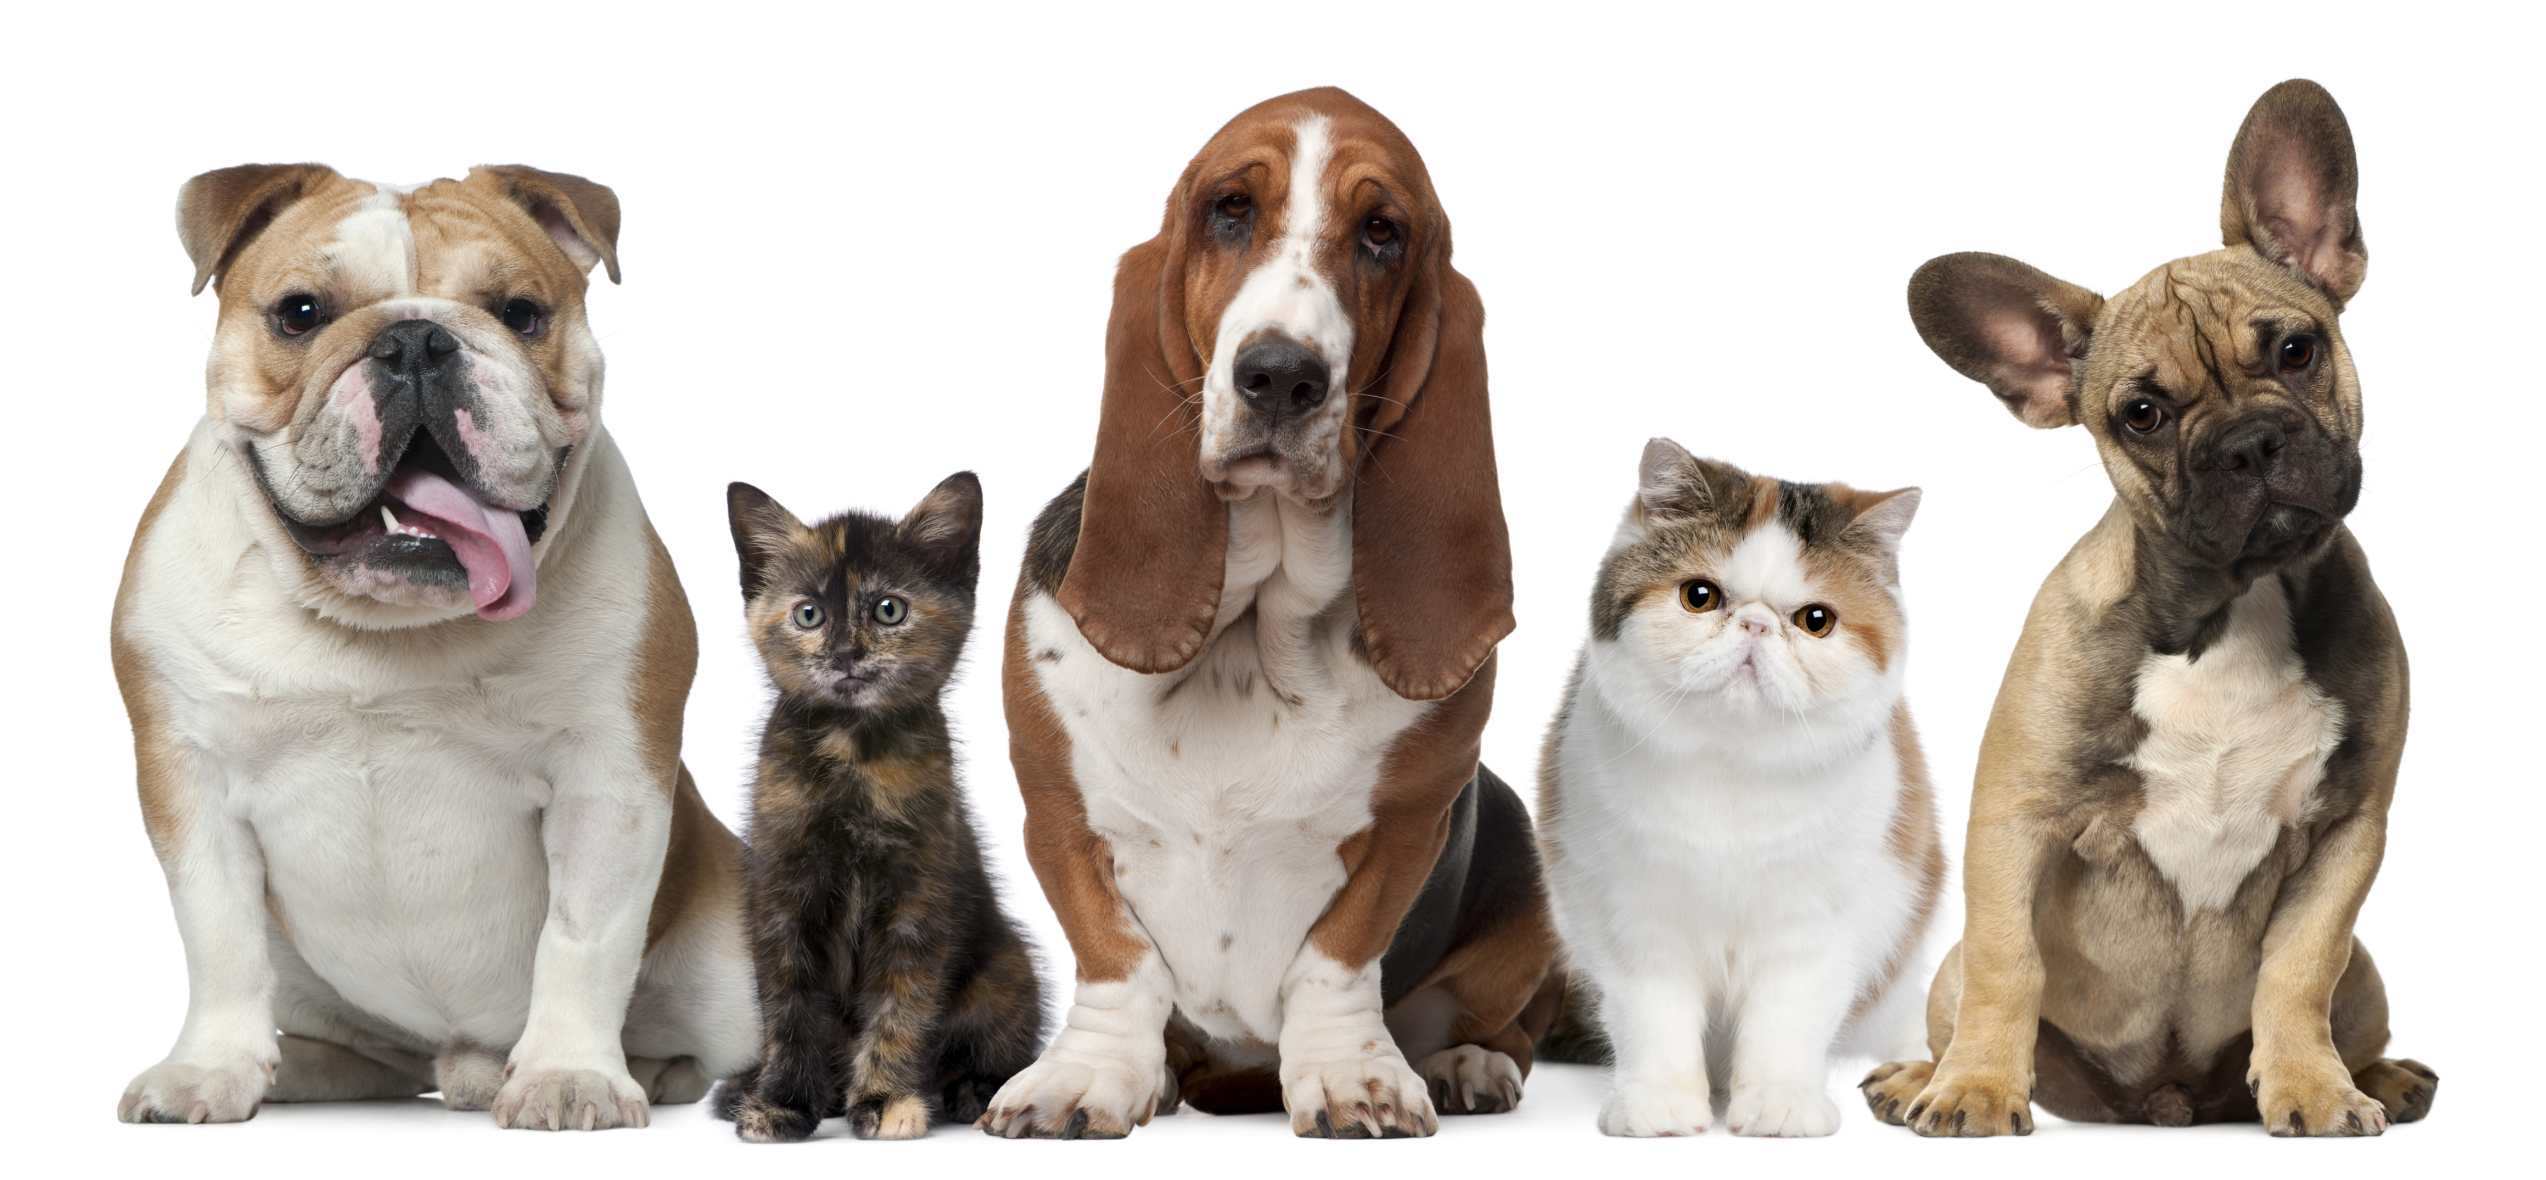 HQ Cat & Dog Wallpapers | File 1140.05Kb